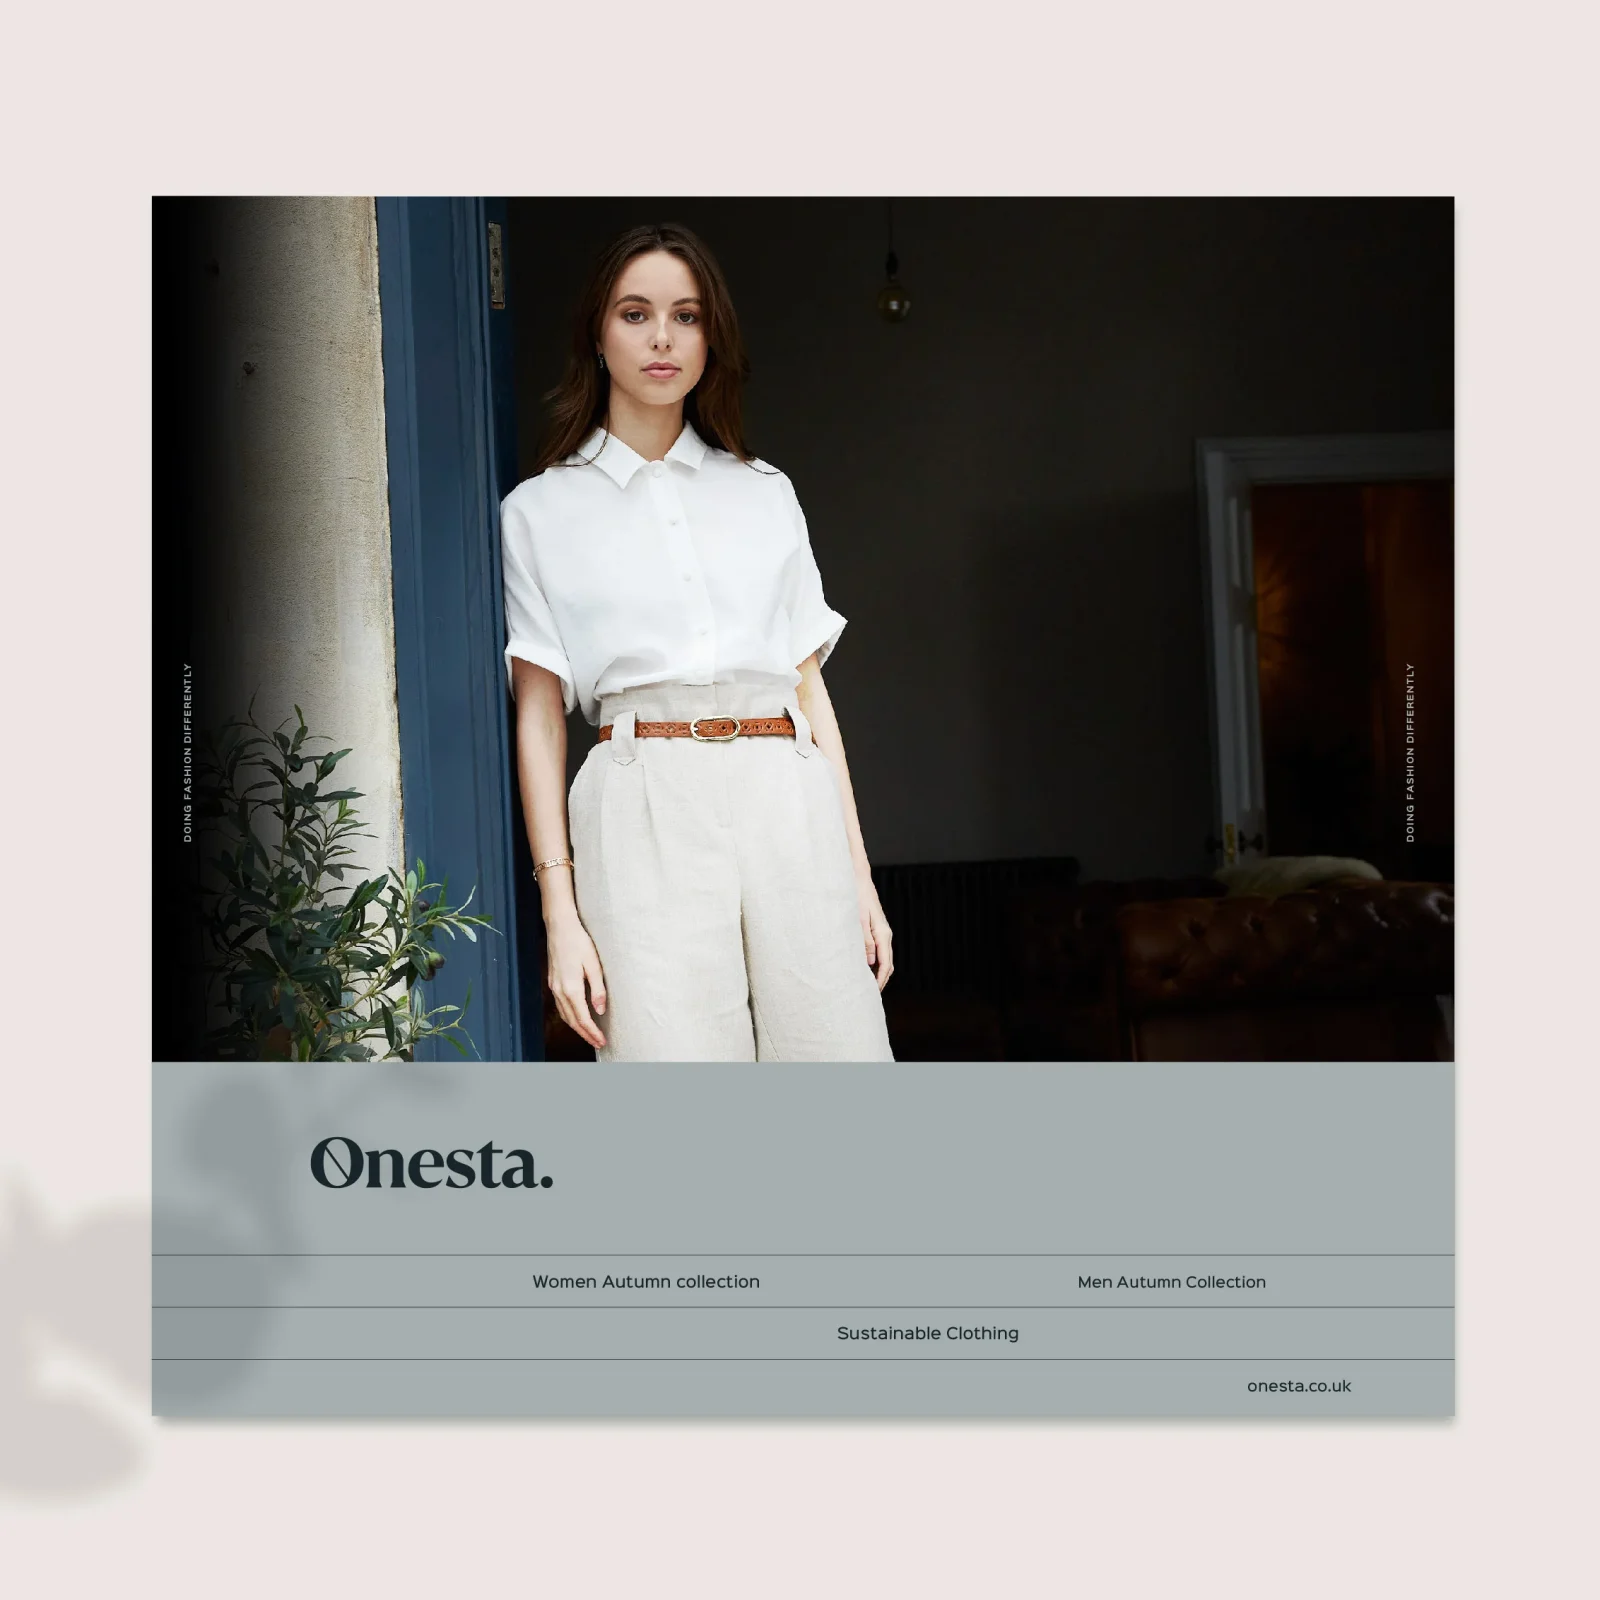 A woman models a chic, minimalist outfit featuring a white shirt and beige trousers, standing in a stylish interior designed by a top design agency in the UK. The image is an advertisement for Onesta's